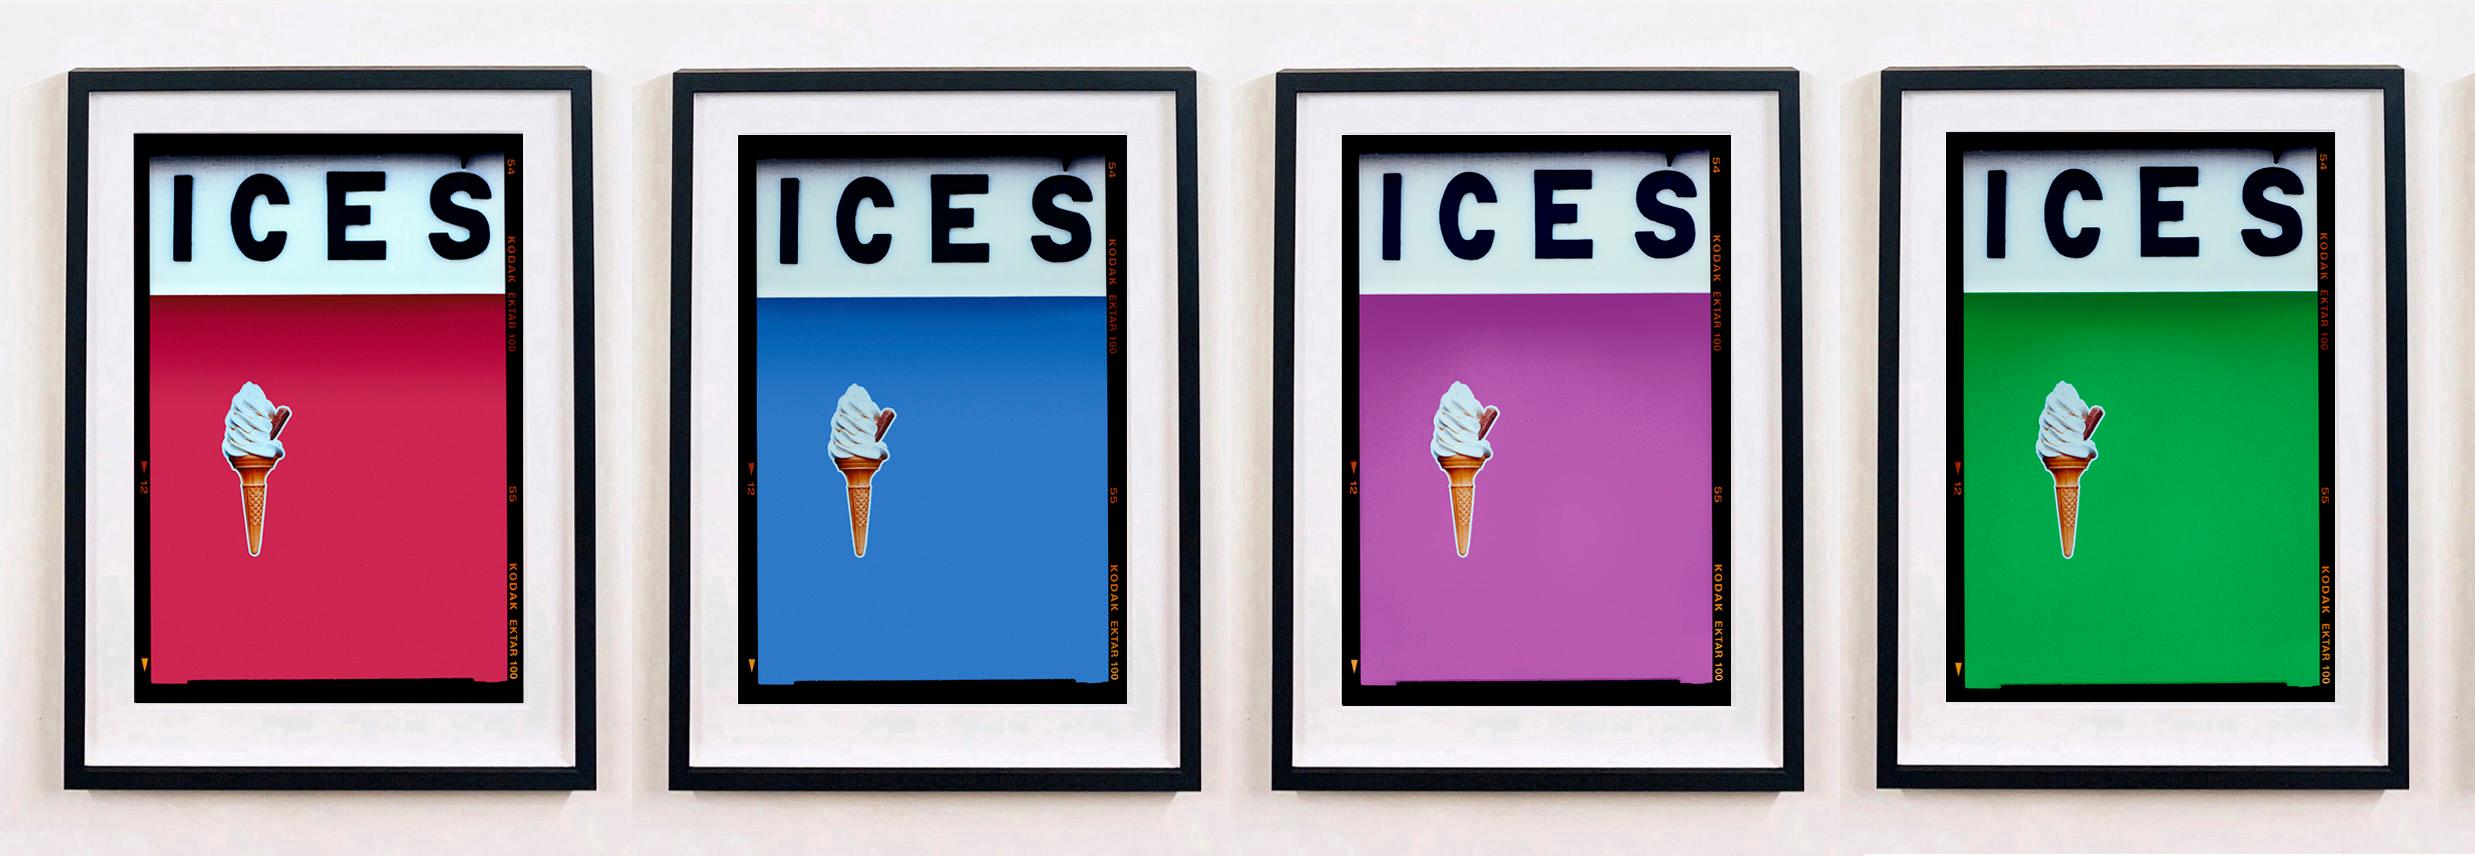 Ices (Plum), Bexhill-on-Sea - British seaside color photography For Sale 2